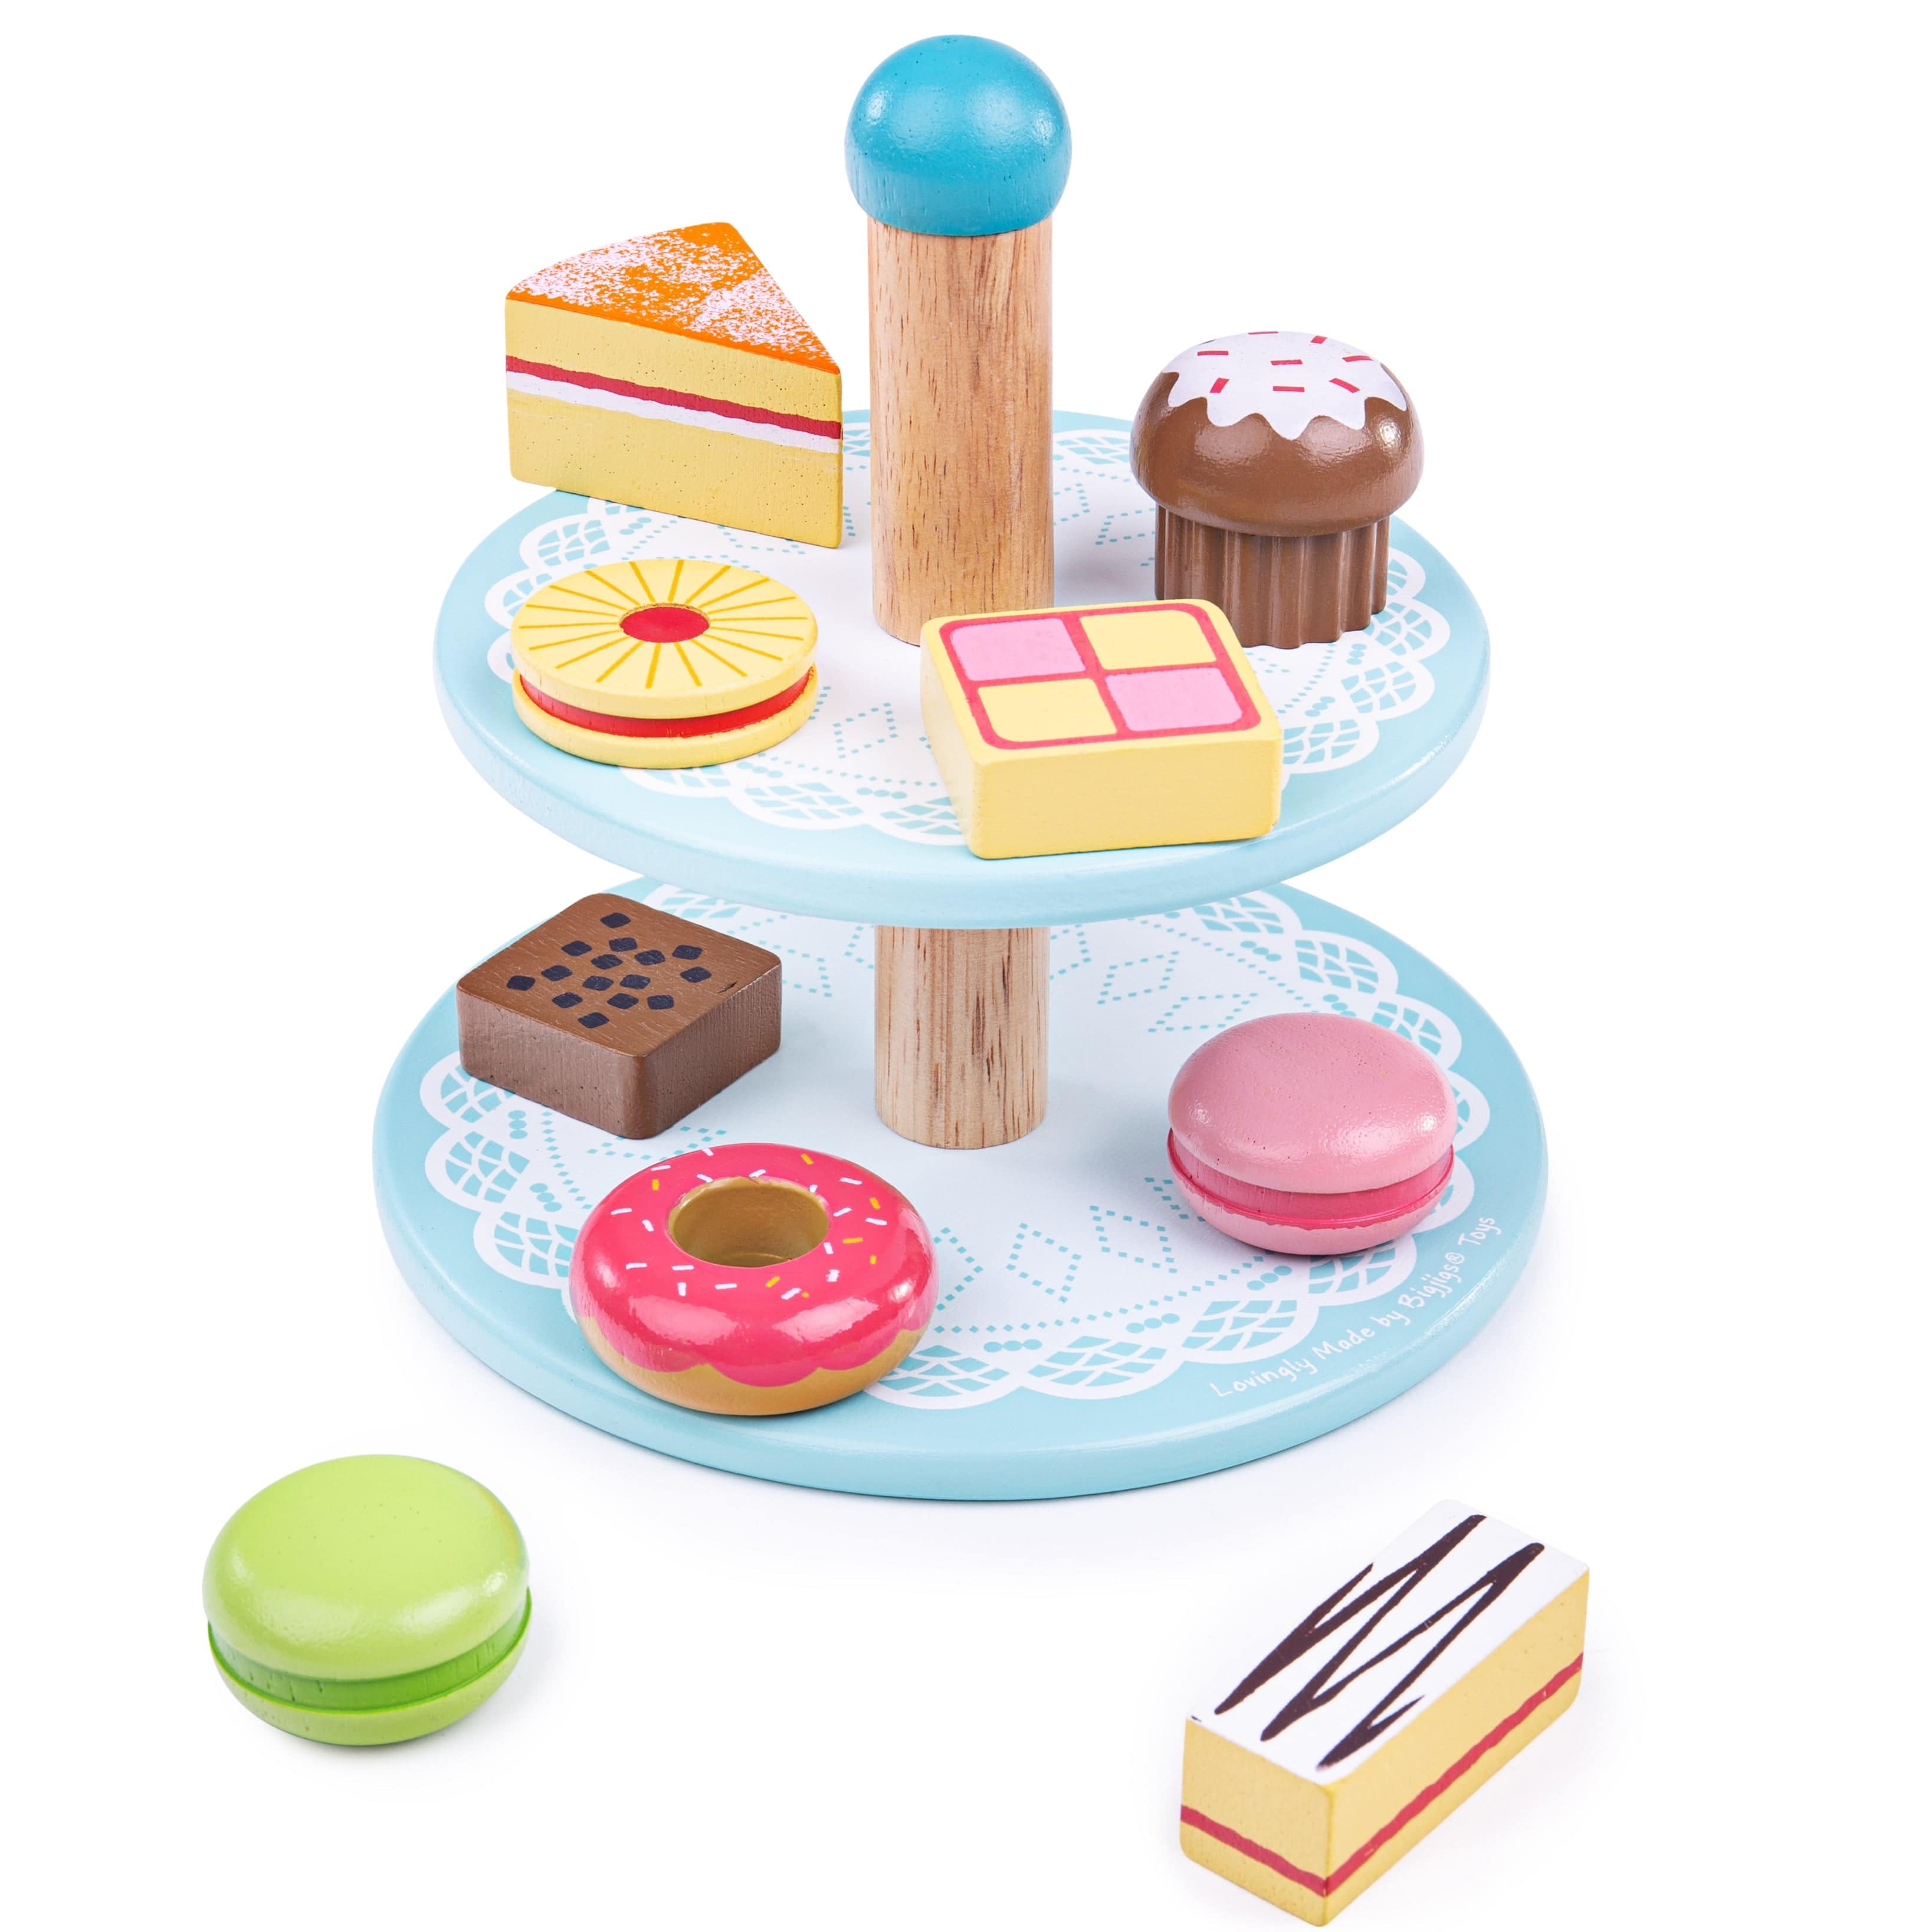 Bigjigs Toys Cake Stand With Cakes